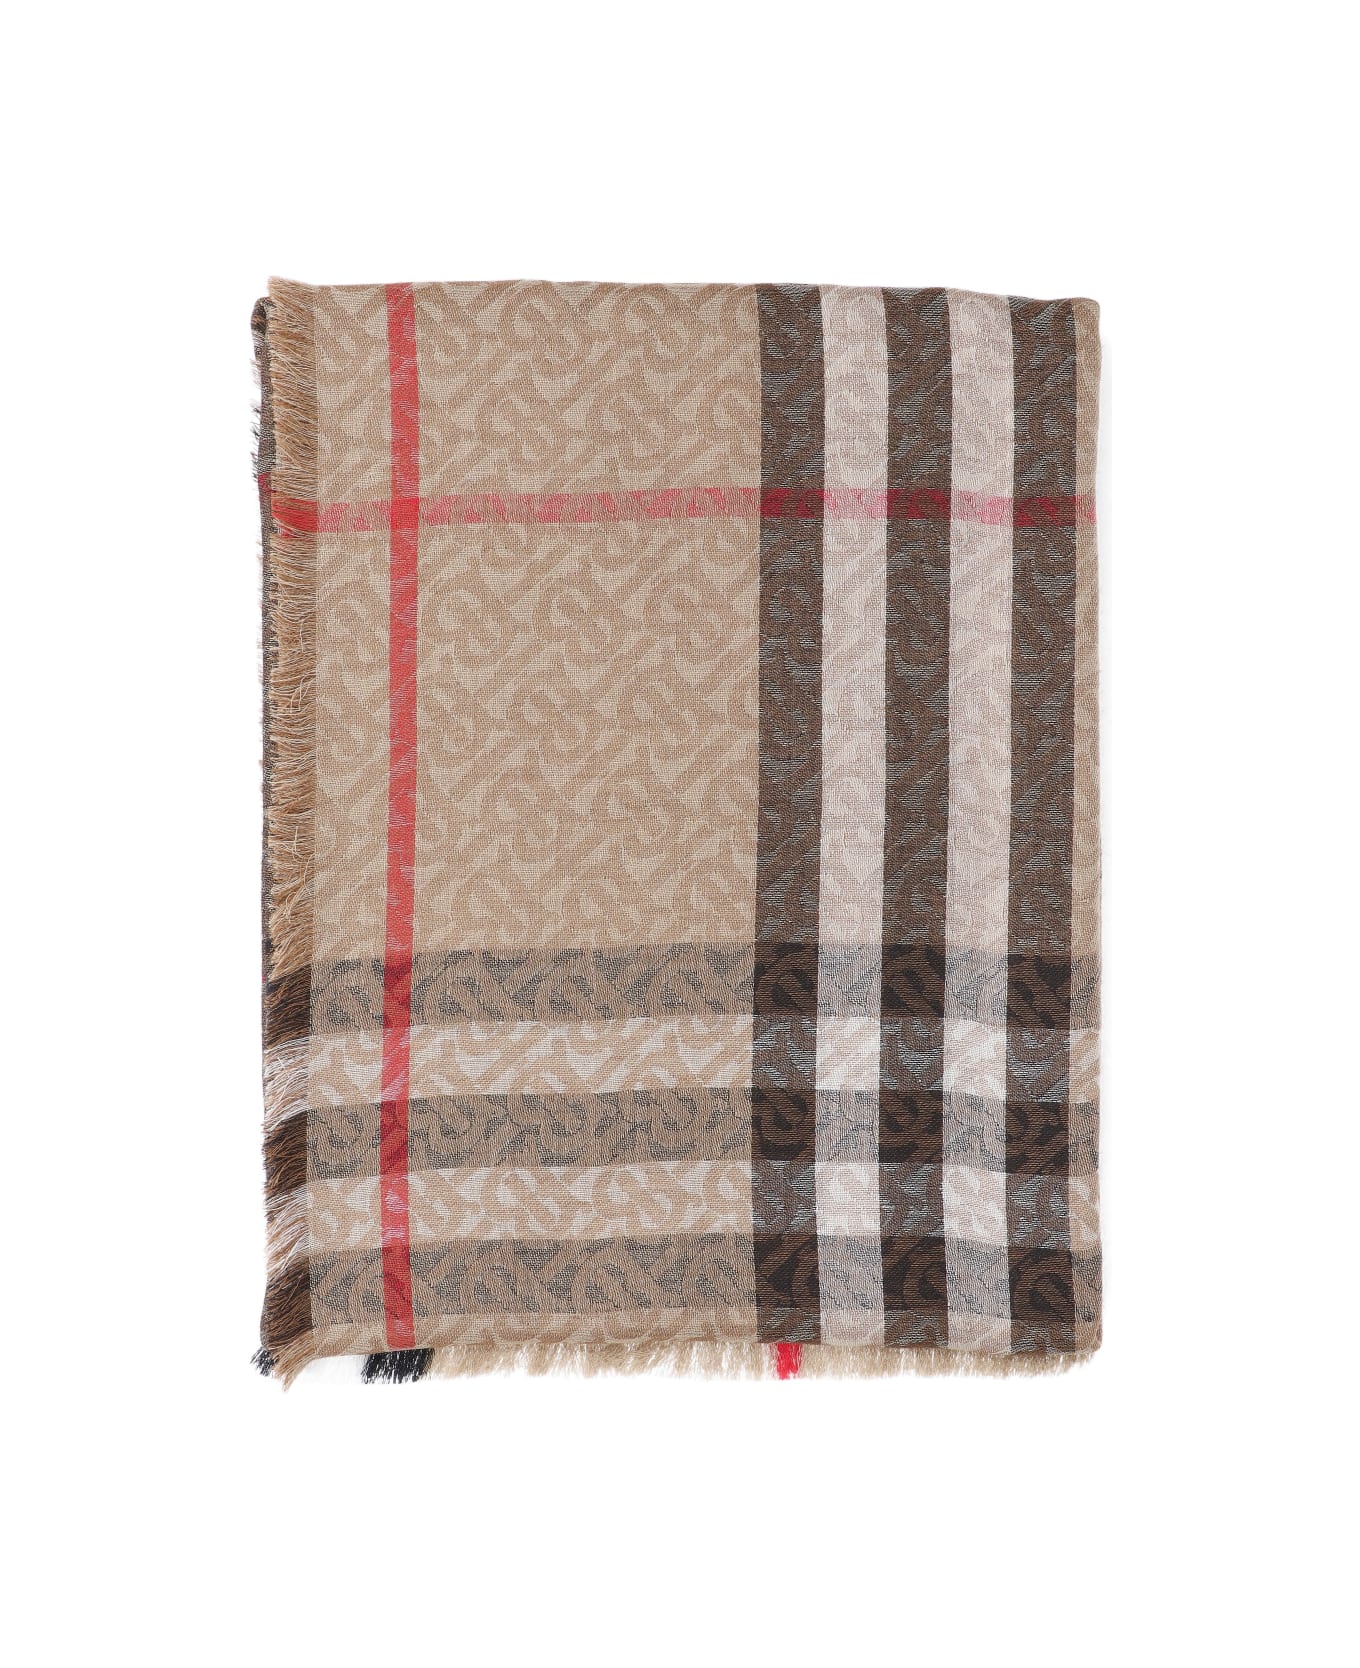 Burberry Embroidered Wool Blend Scarf - Beige スカーフ＆ストール